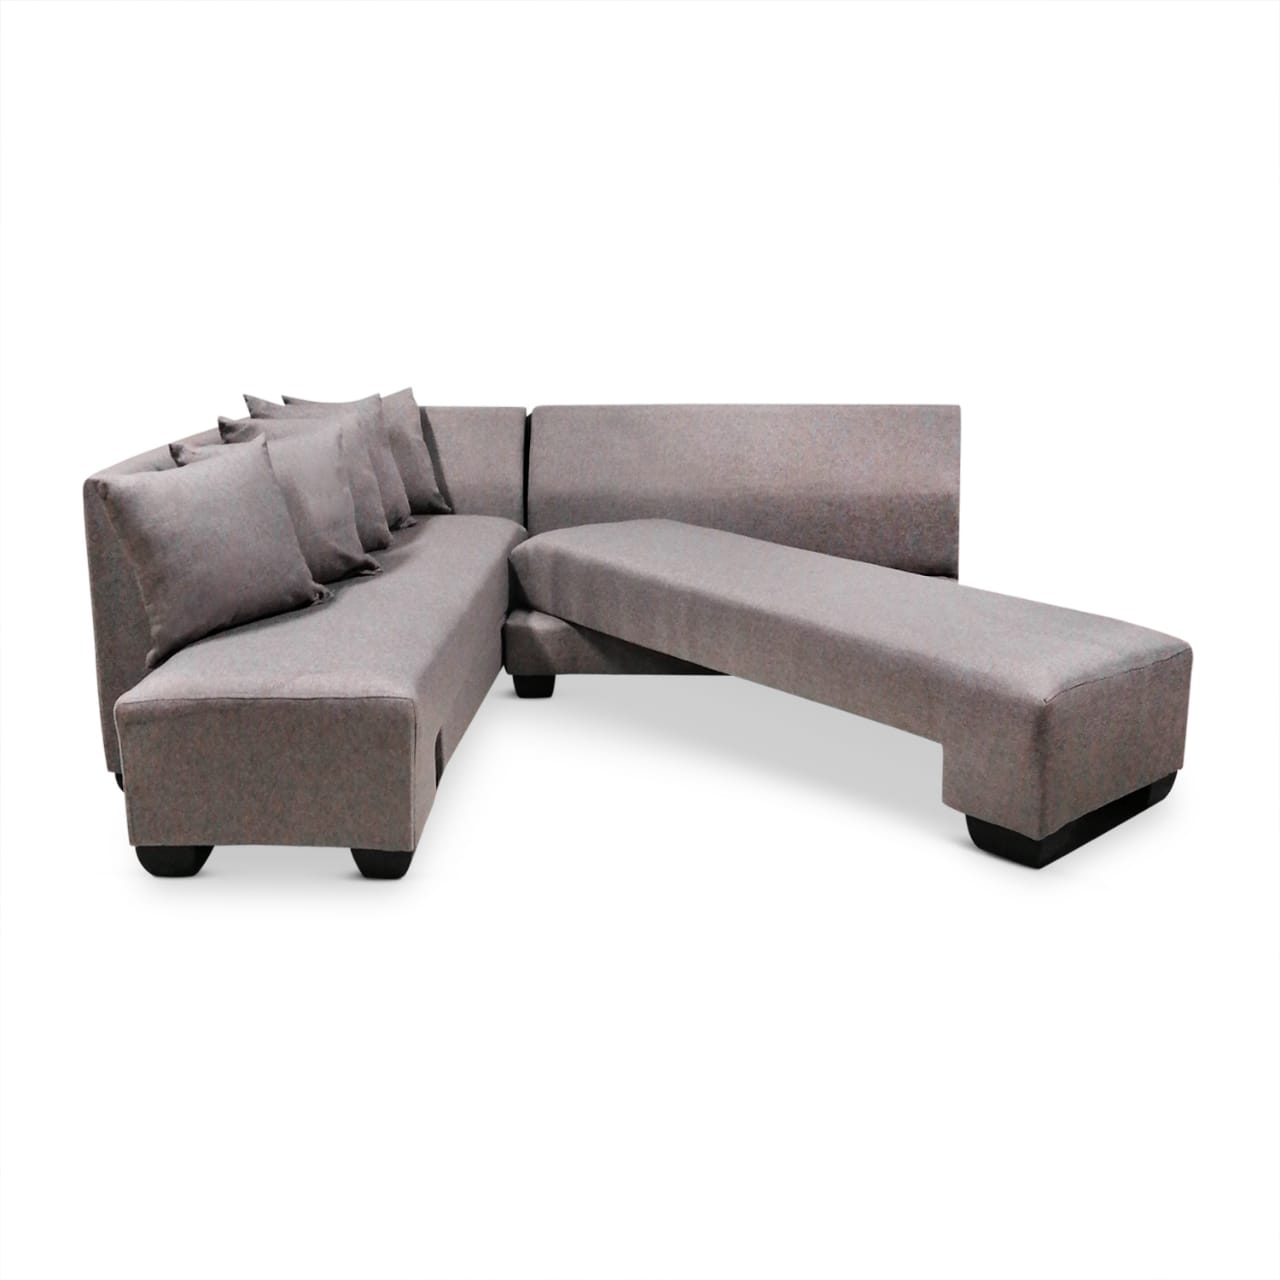 Corner Sleeper Couch - That Couch Place